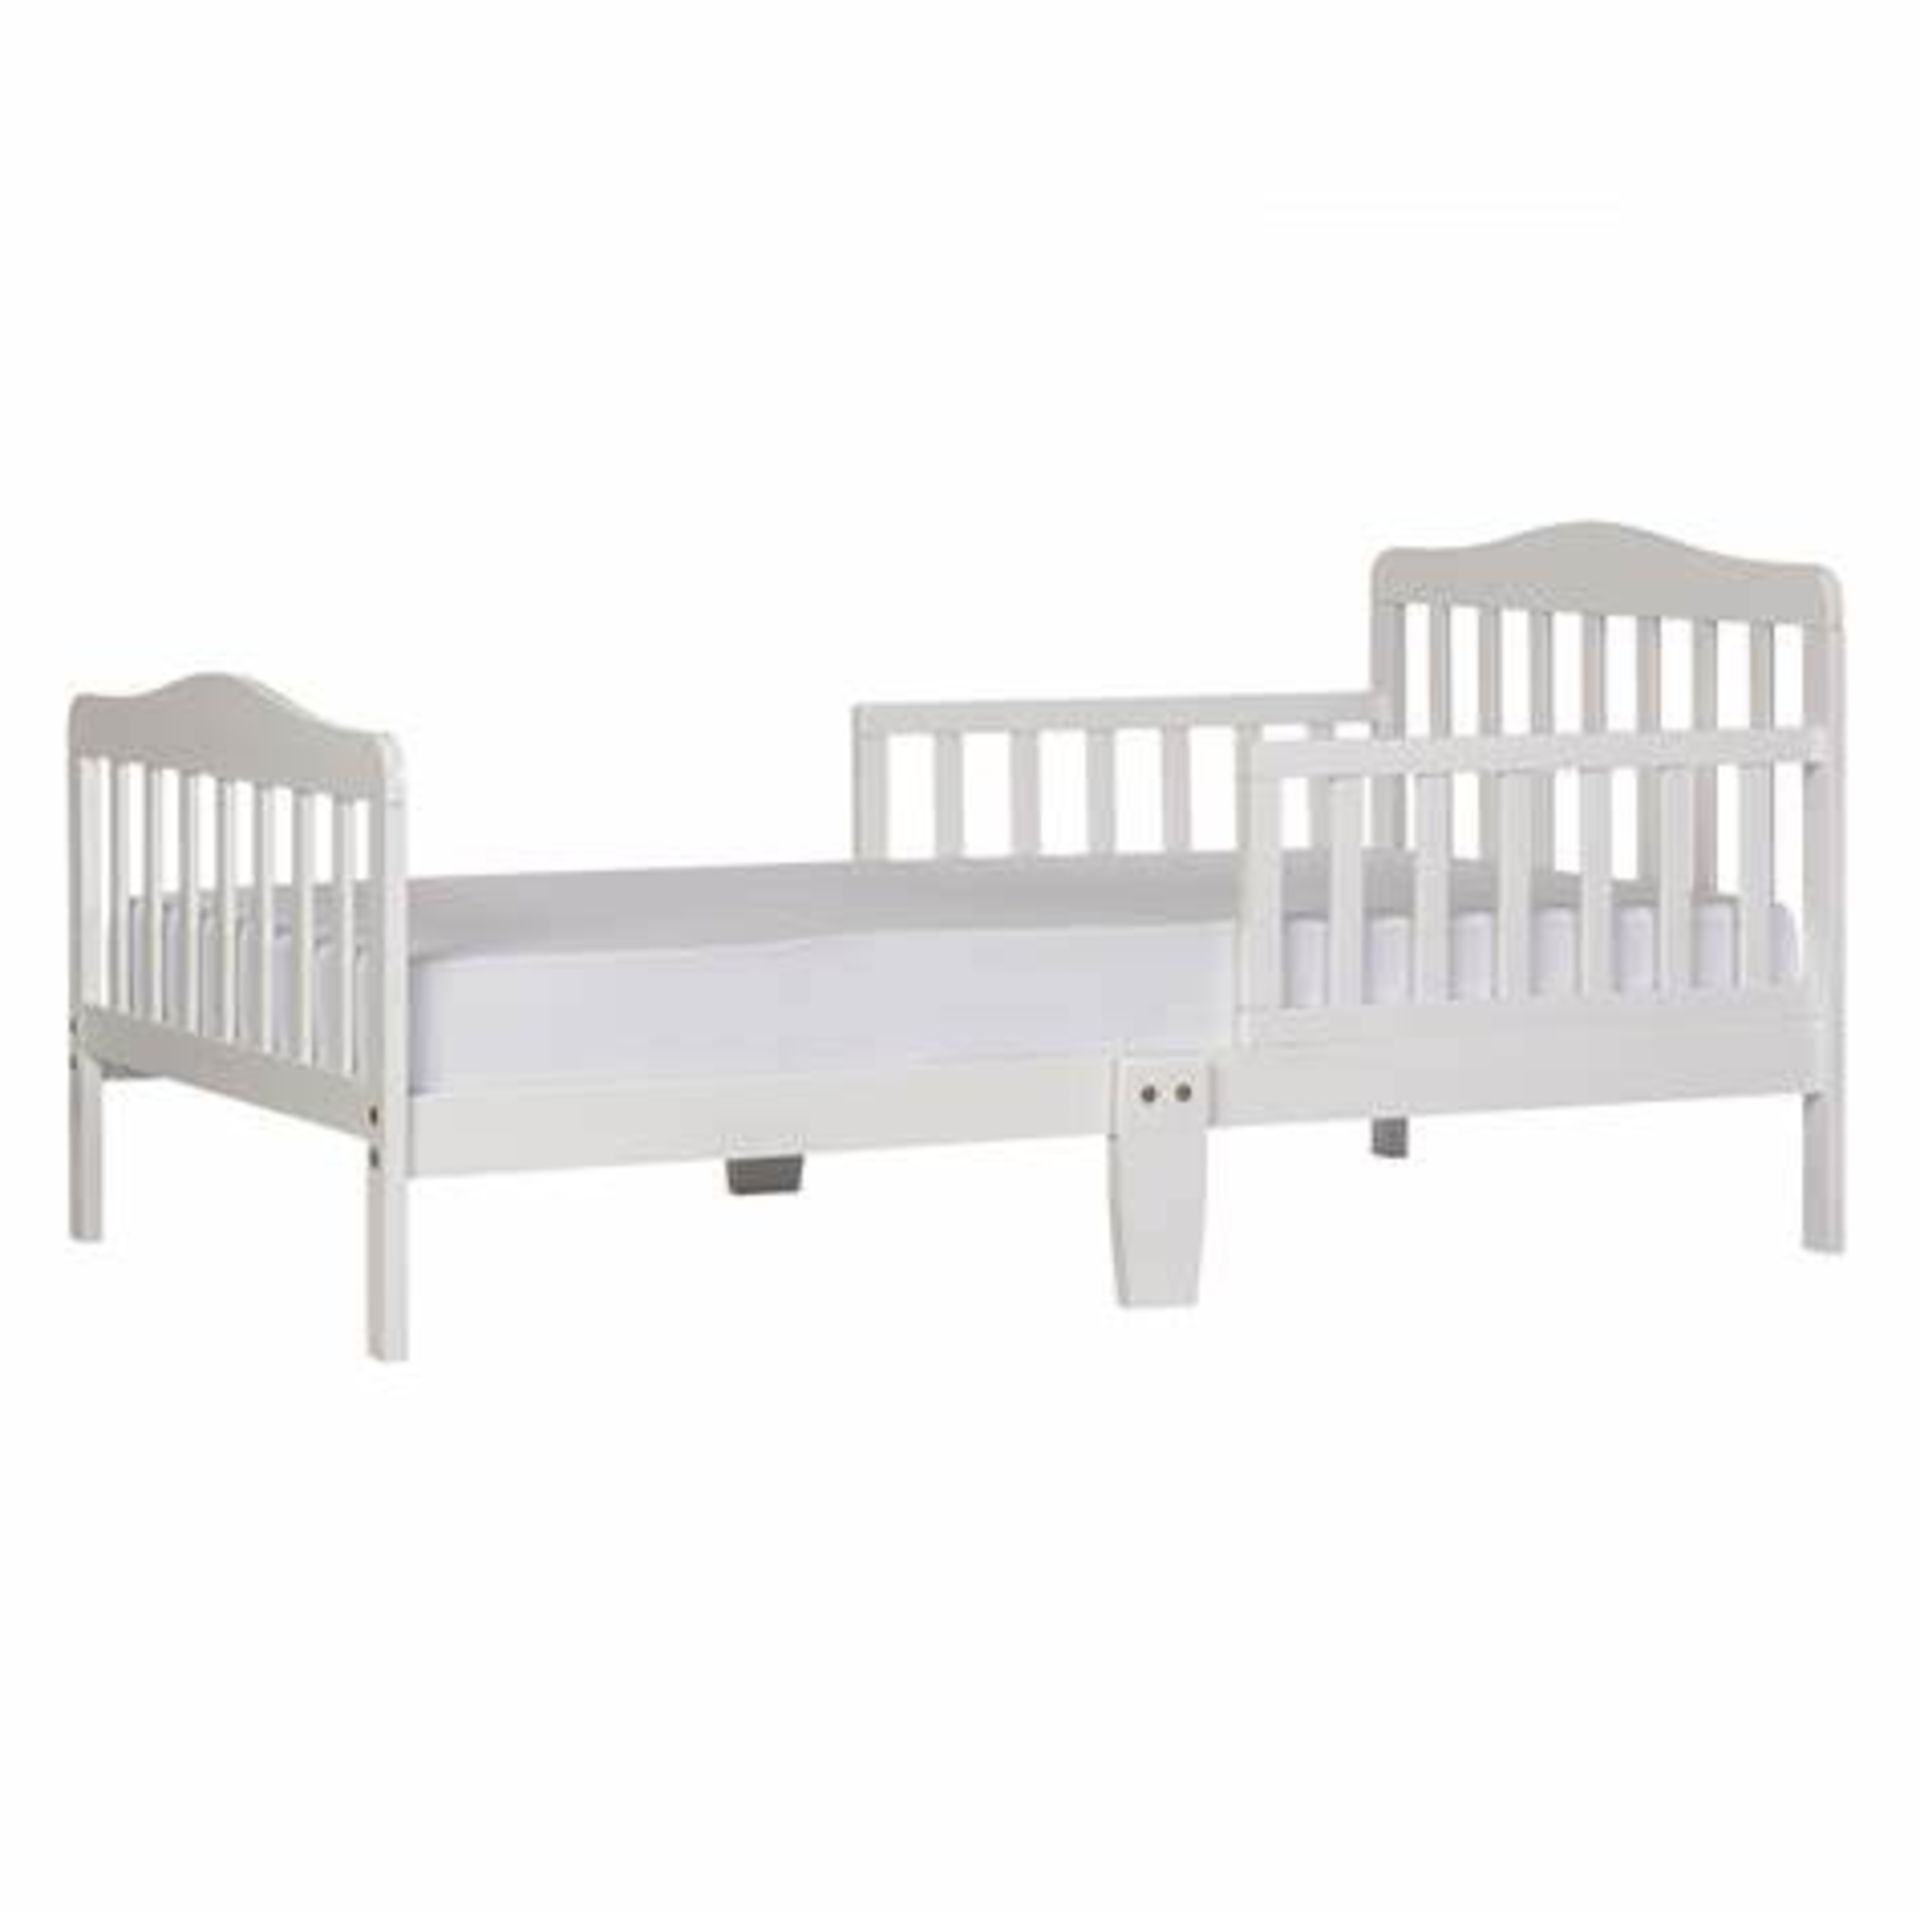 Brand New Dream on Me Classic Toddler Bed. Product dimensionS - 144.8L x 71.1W x 76.2H CM Comes with - Image 3 of 5